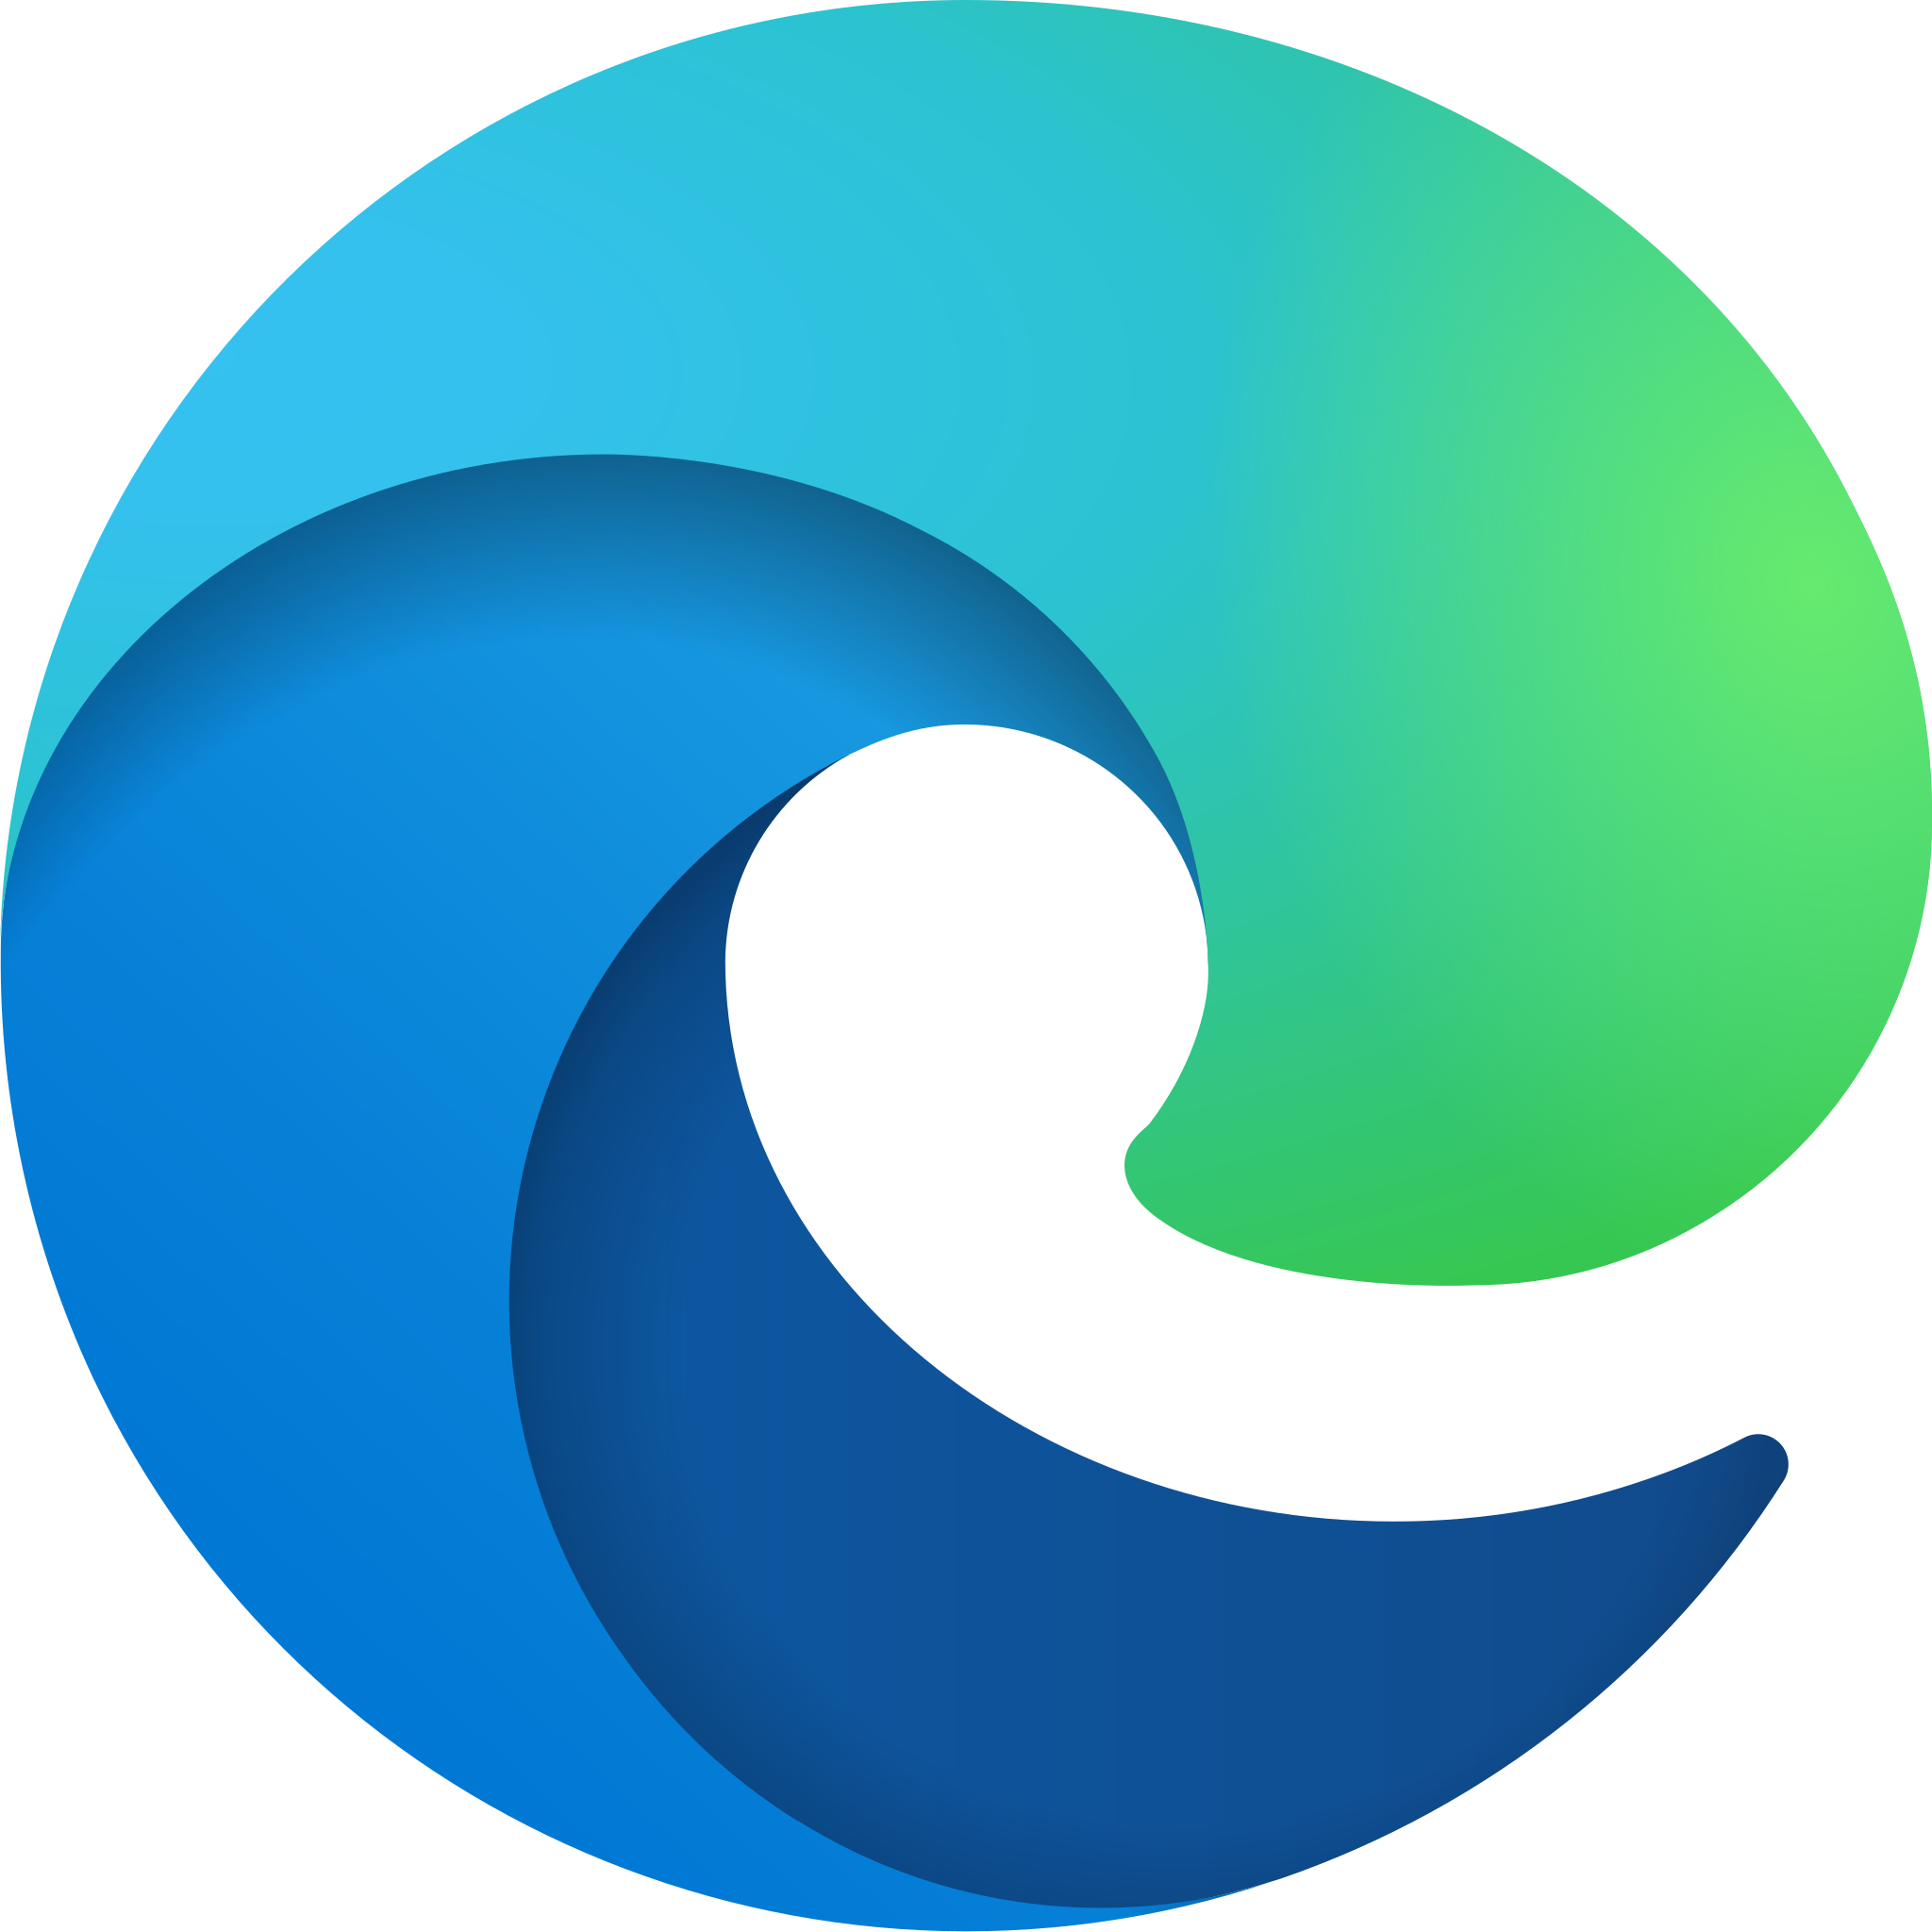 The Microsoft Edge logo. It depicts a wave that is shaped similarly to the letter "e" with a dark blue to green gradient starting from the bottom and ending at the top.